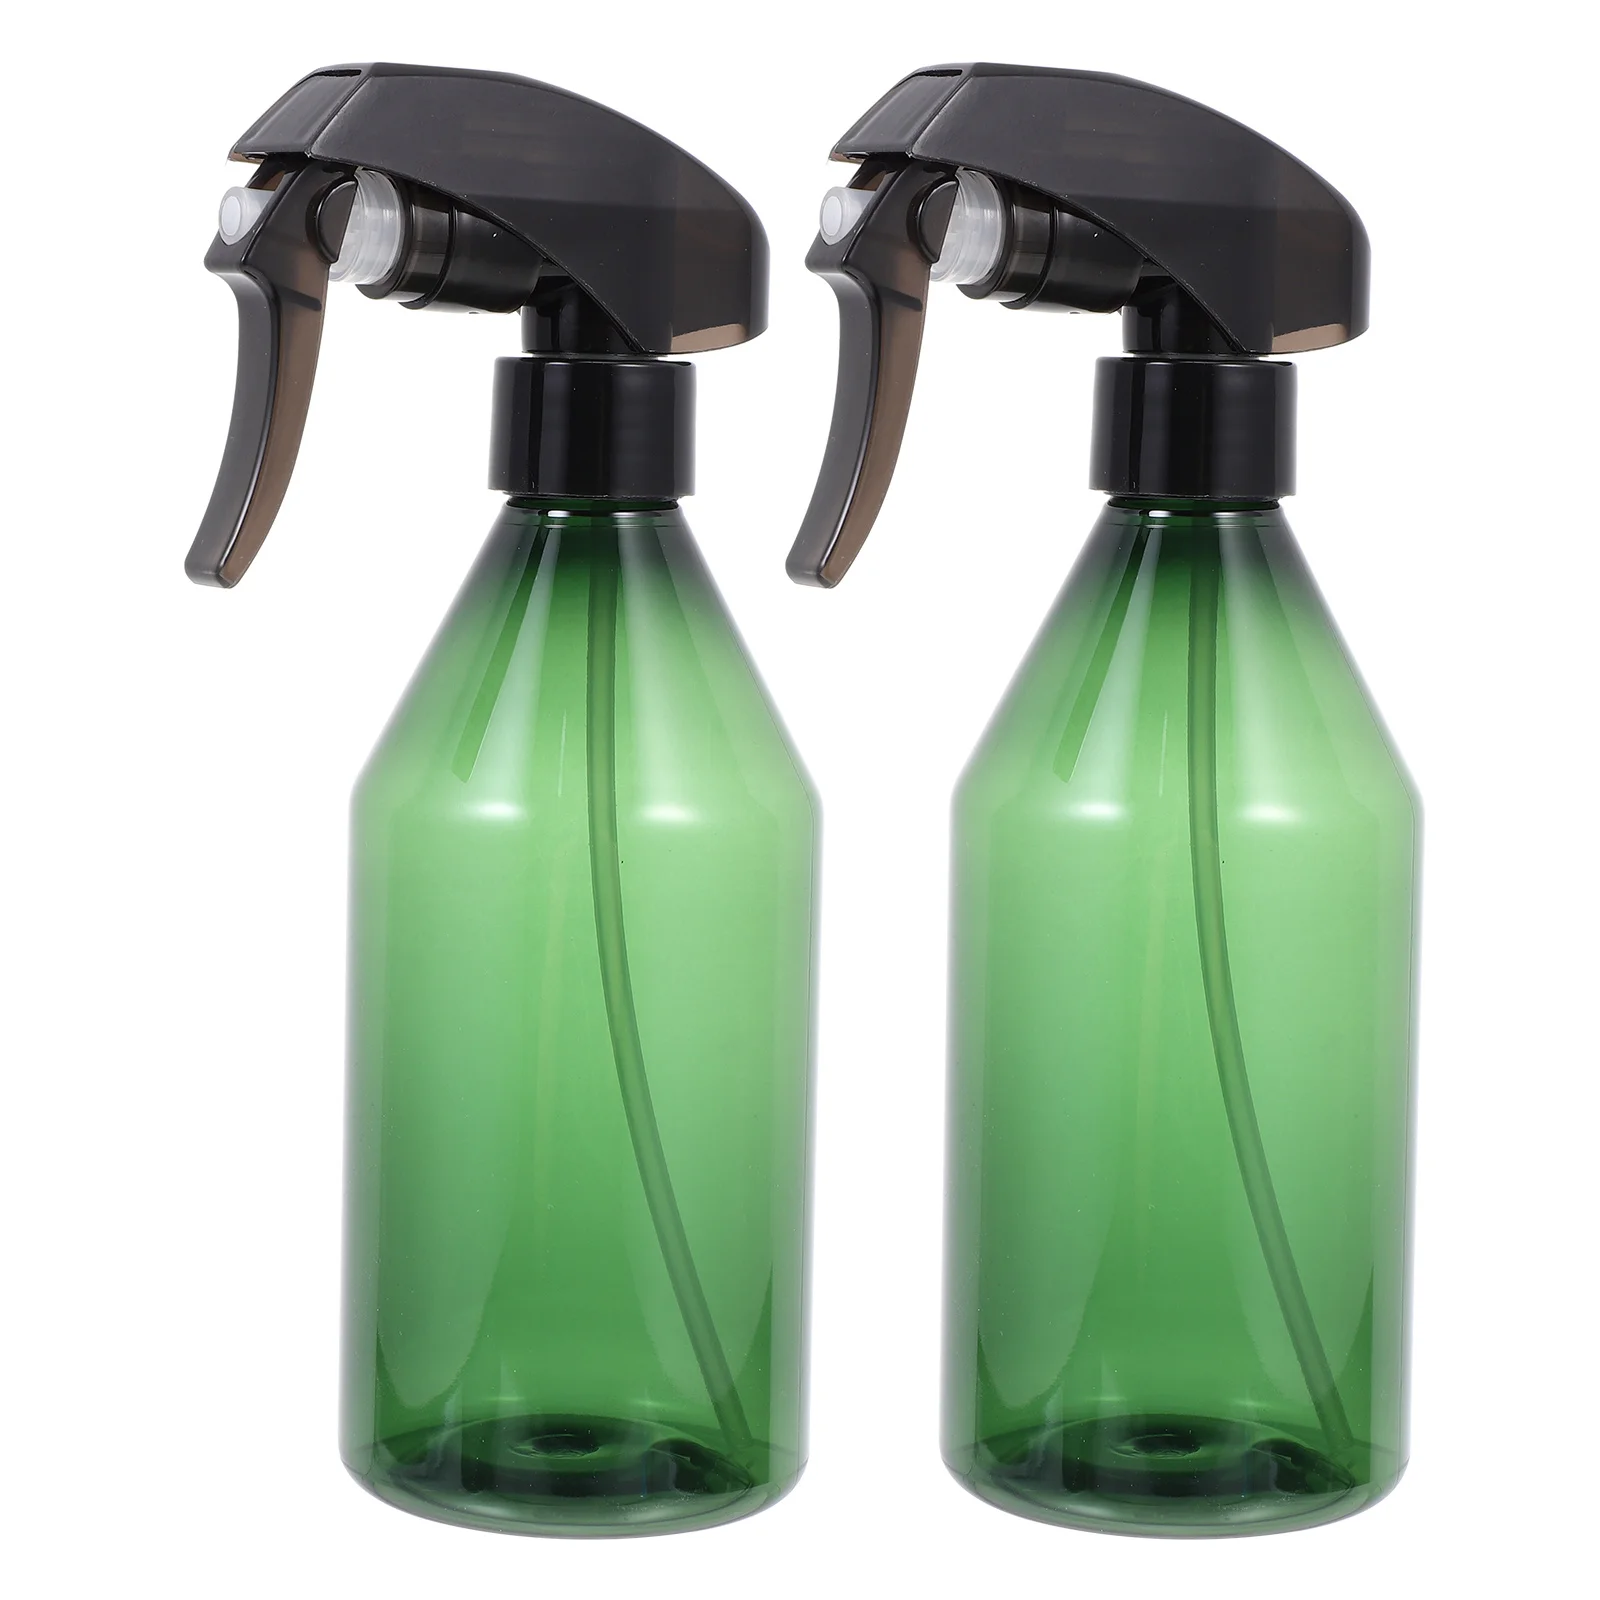 

2 PCS Clear Spray Bottle Cosmetics Spraying Bottles Garden Watering Cans Household Refillable Flower Container